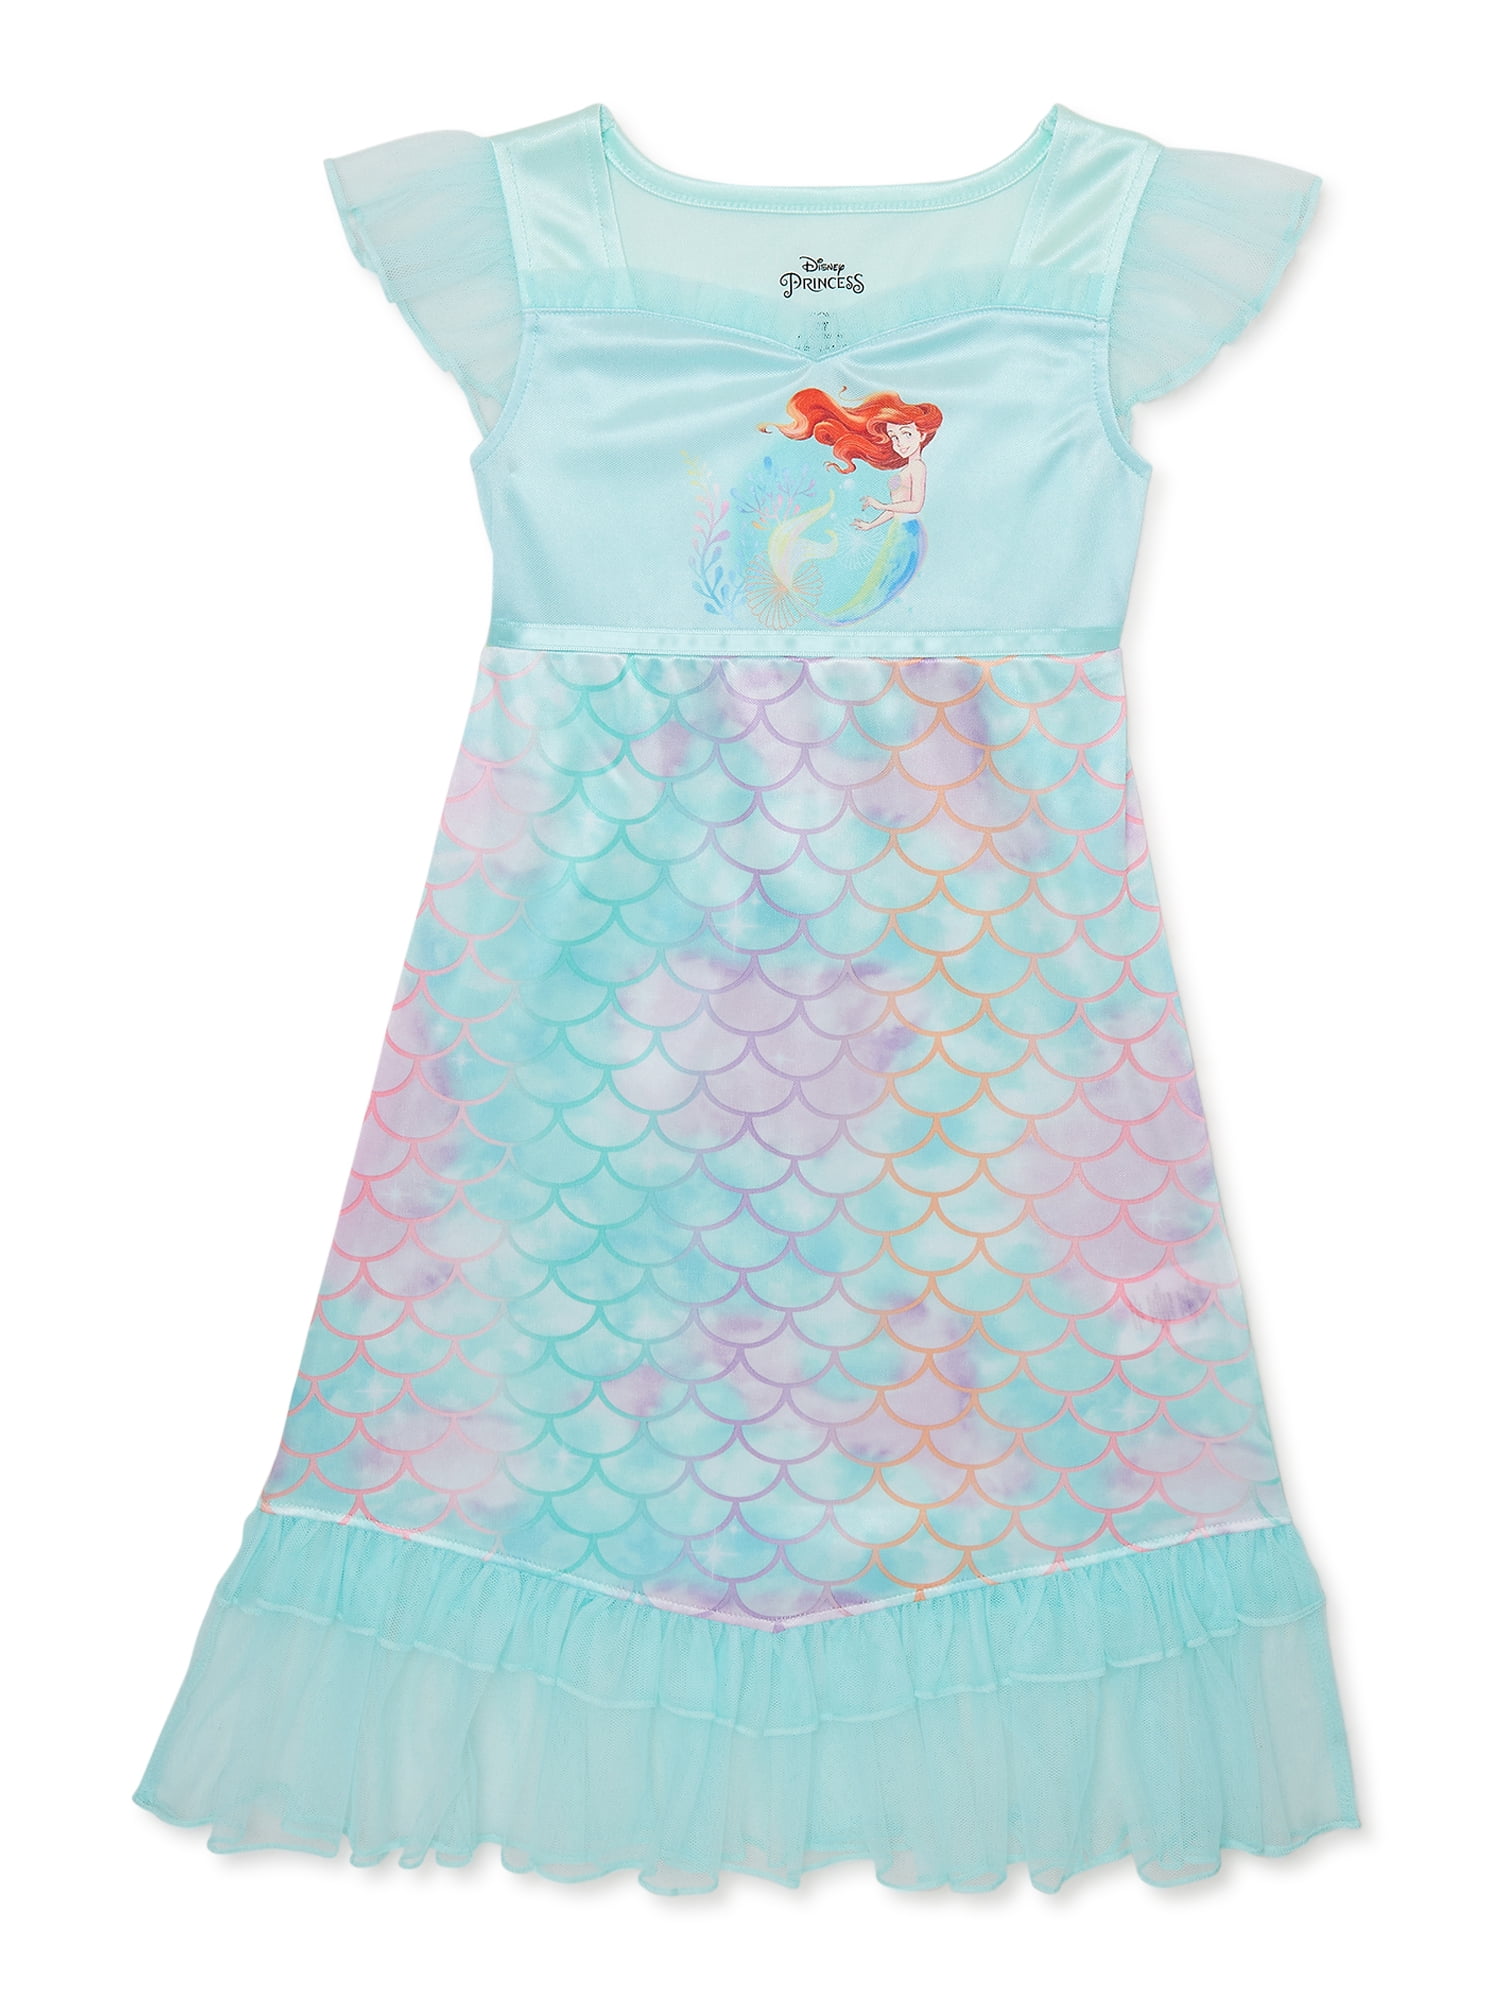 The Little Mermaid Toddler Girl Print Ruffled Nightgown, Sizes 2T-5T